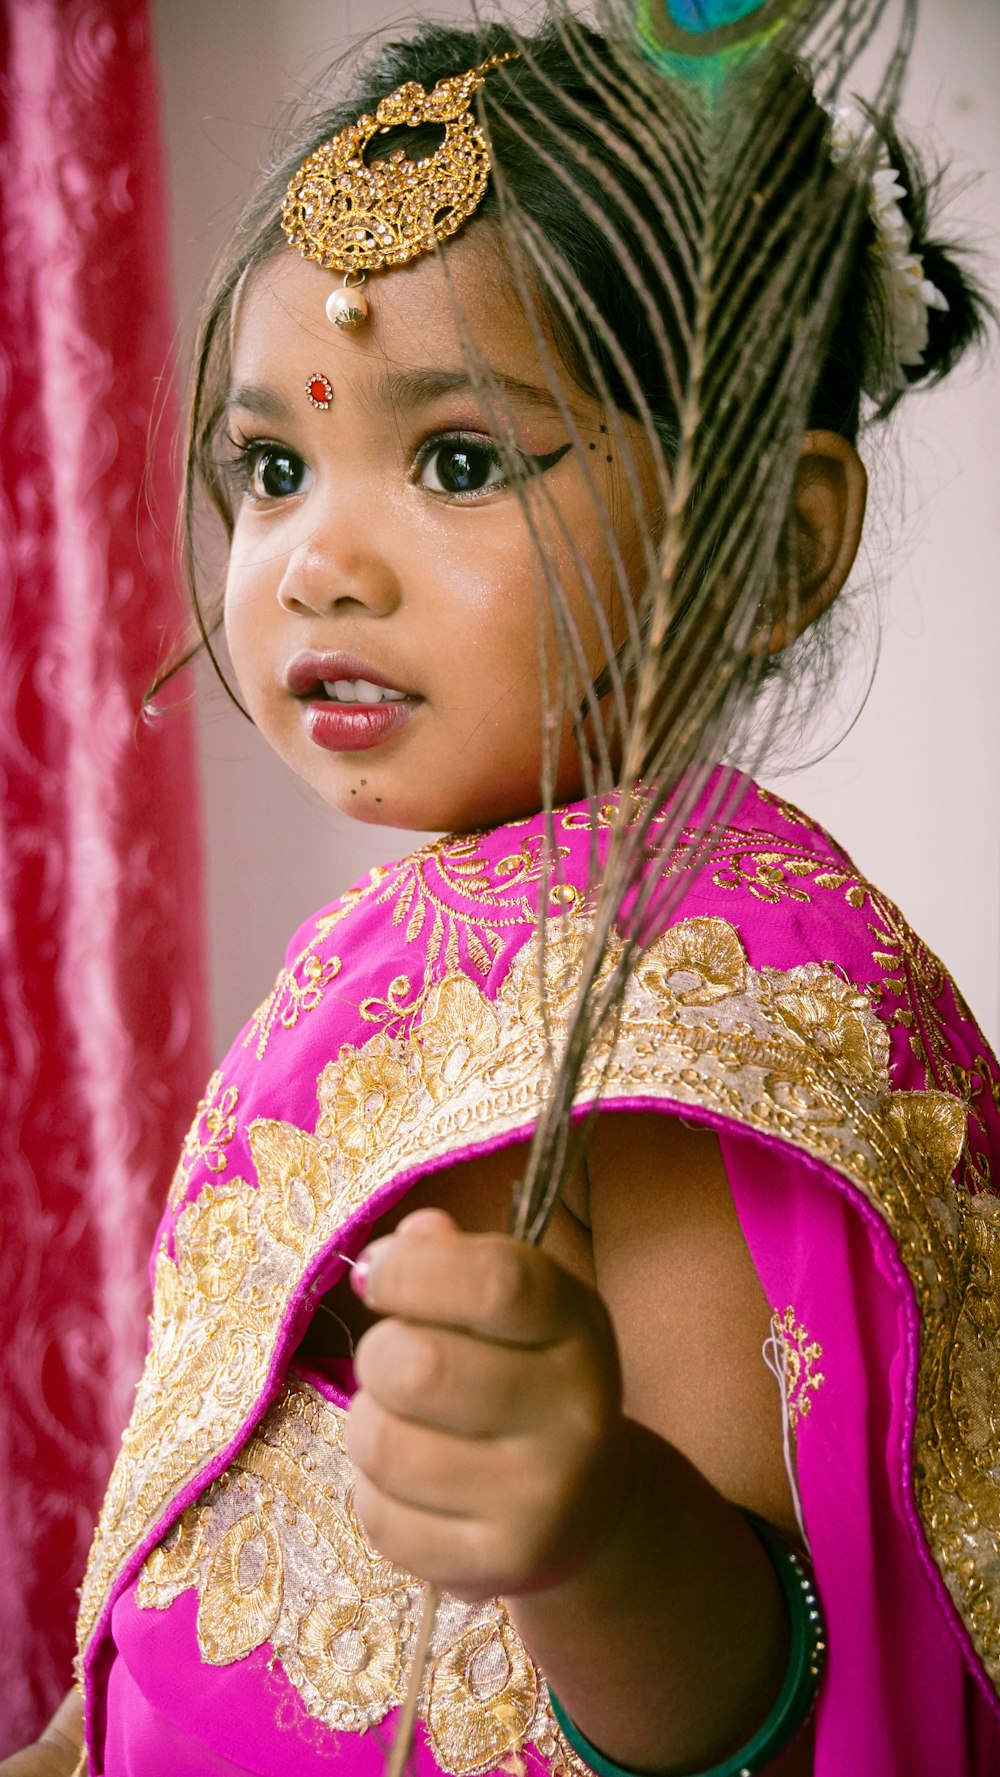 a little girl in a pink dress holding a feather